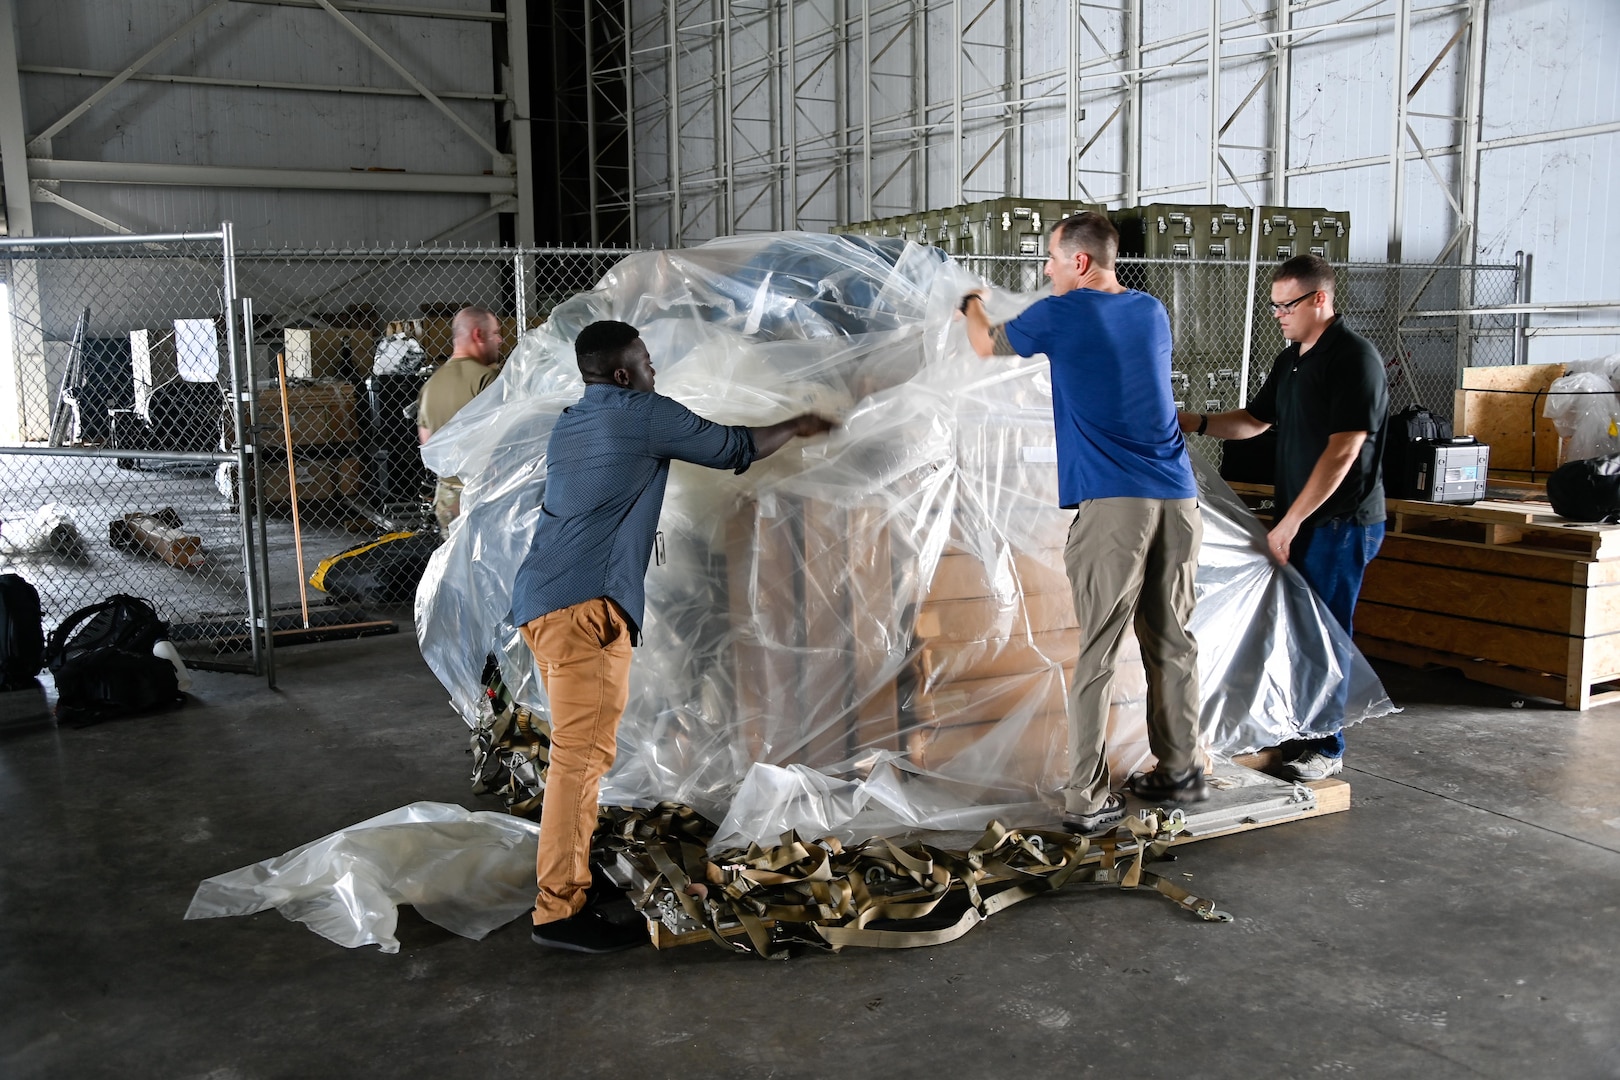 - A team of 14 military personnel assigned to a U.S. Southern Command (SOUTHCOM) Situational Awareness Team (SSAT) deploy to Port-au-Prince, Haiti.